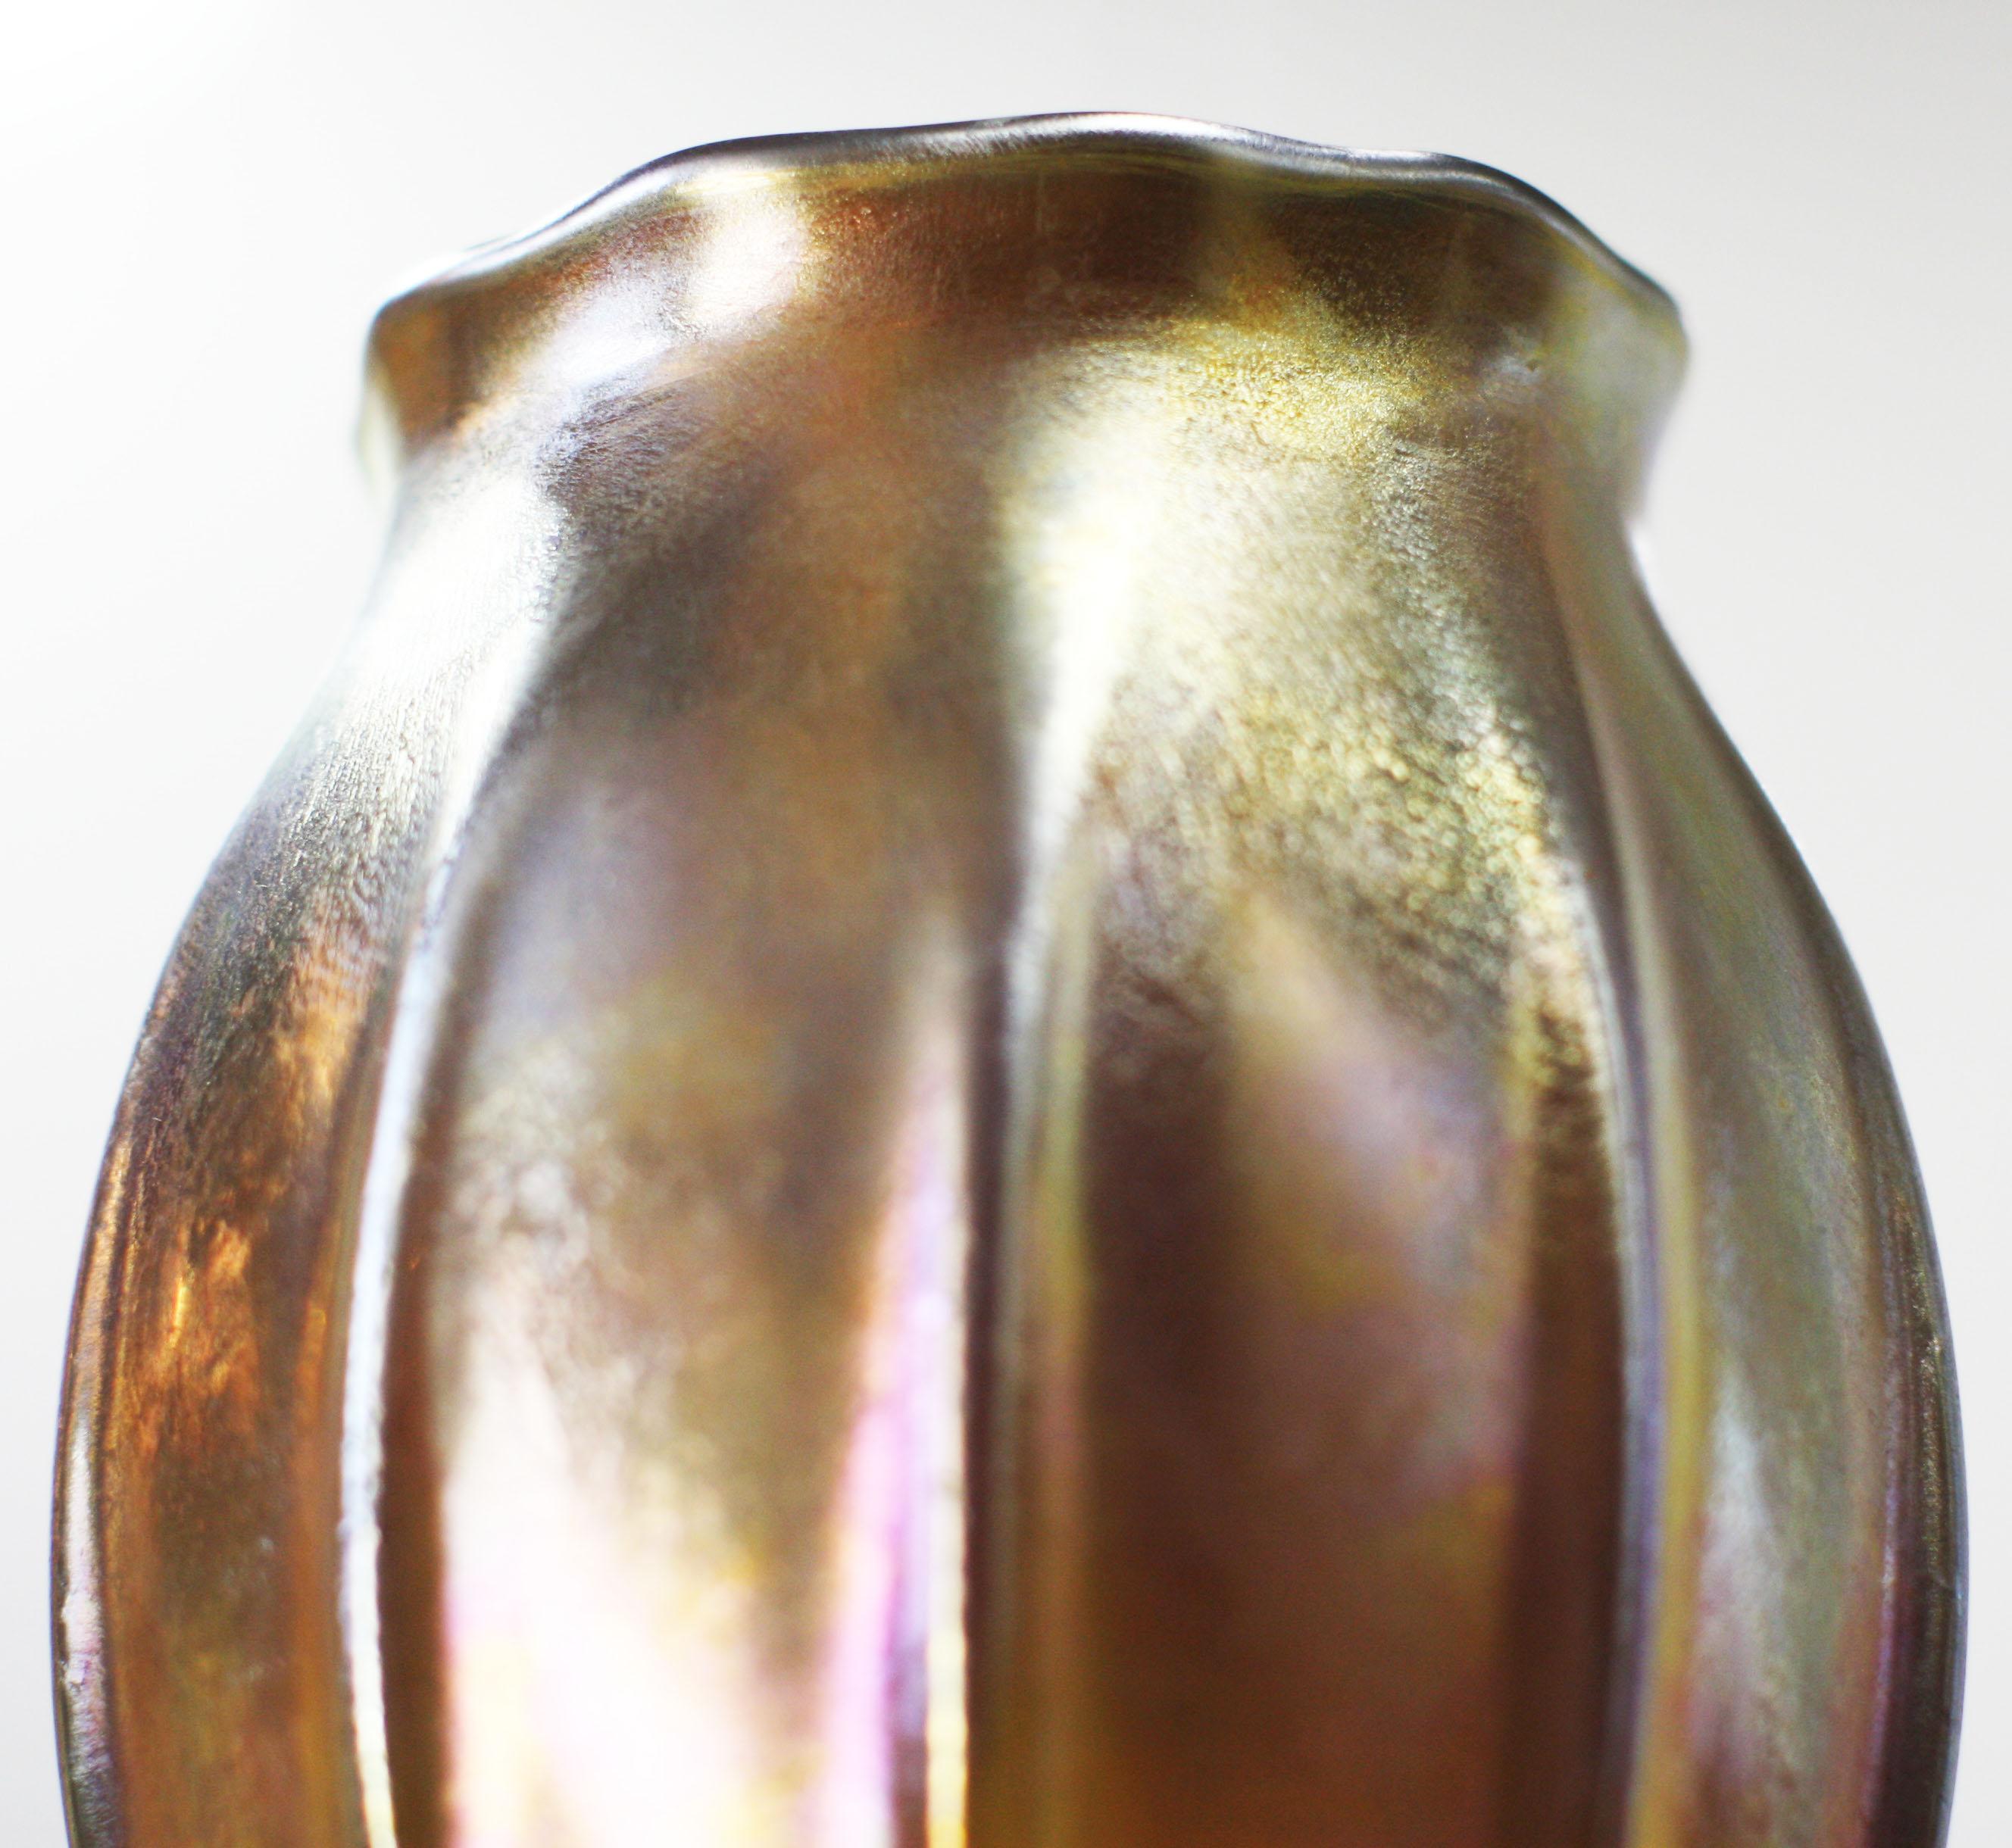 Early 20th Century Tiffany Studios Fine Ribbed Tiffany Favrile Glass Floriform Footed Vase